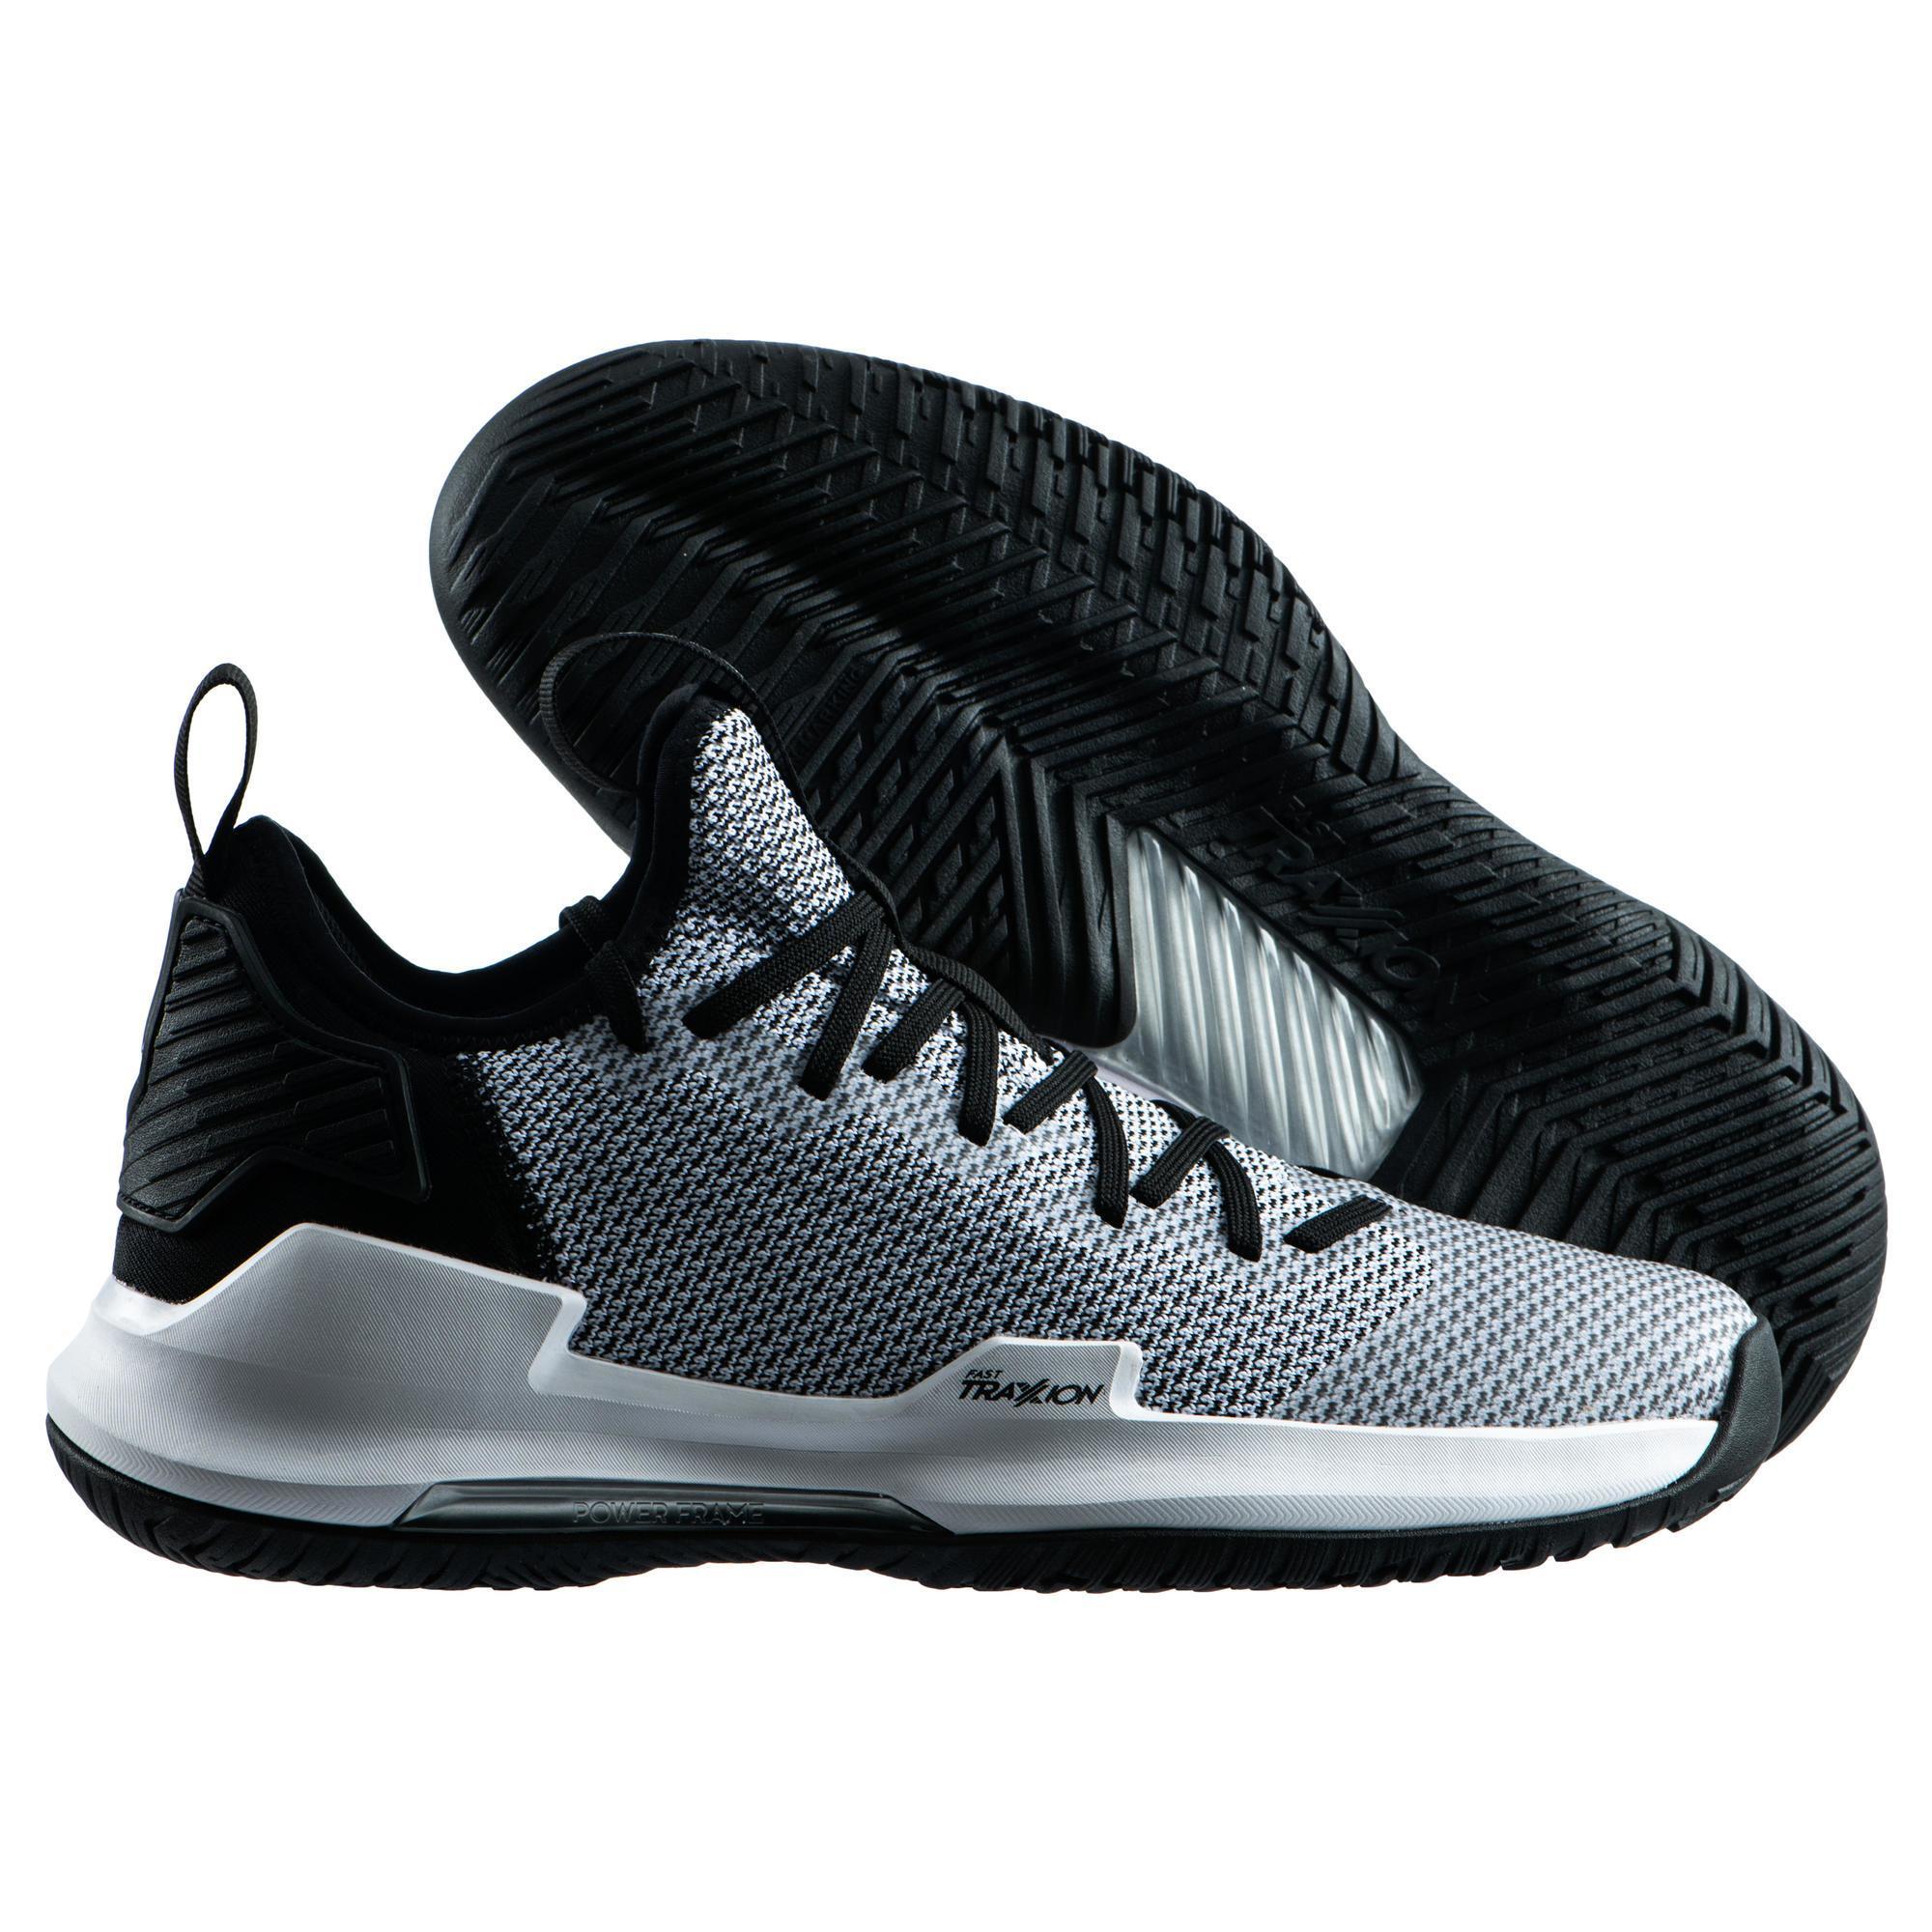 Low-Rise Basketball Shoes Fast 500 